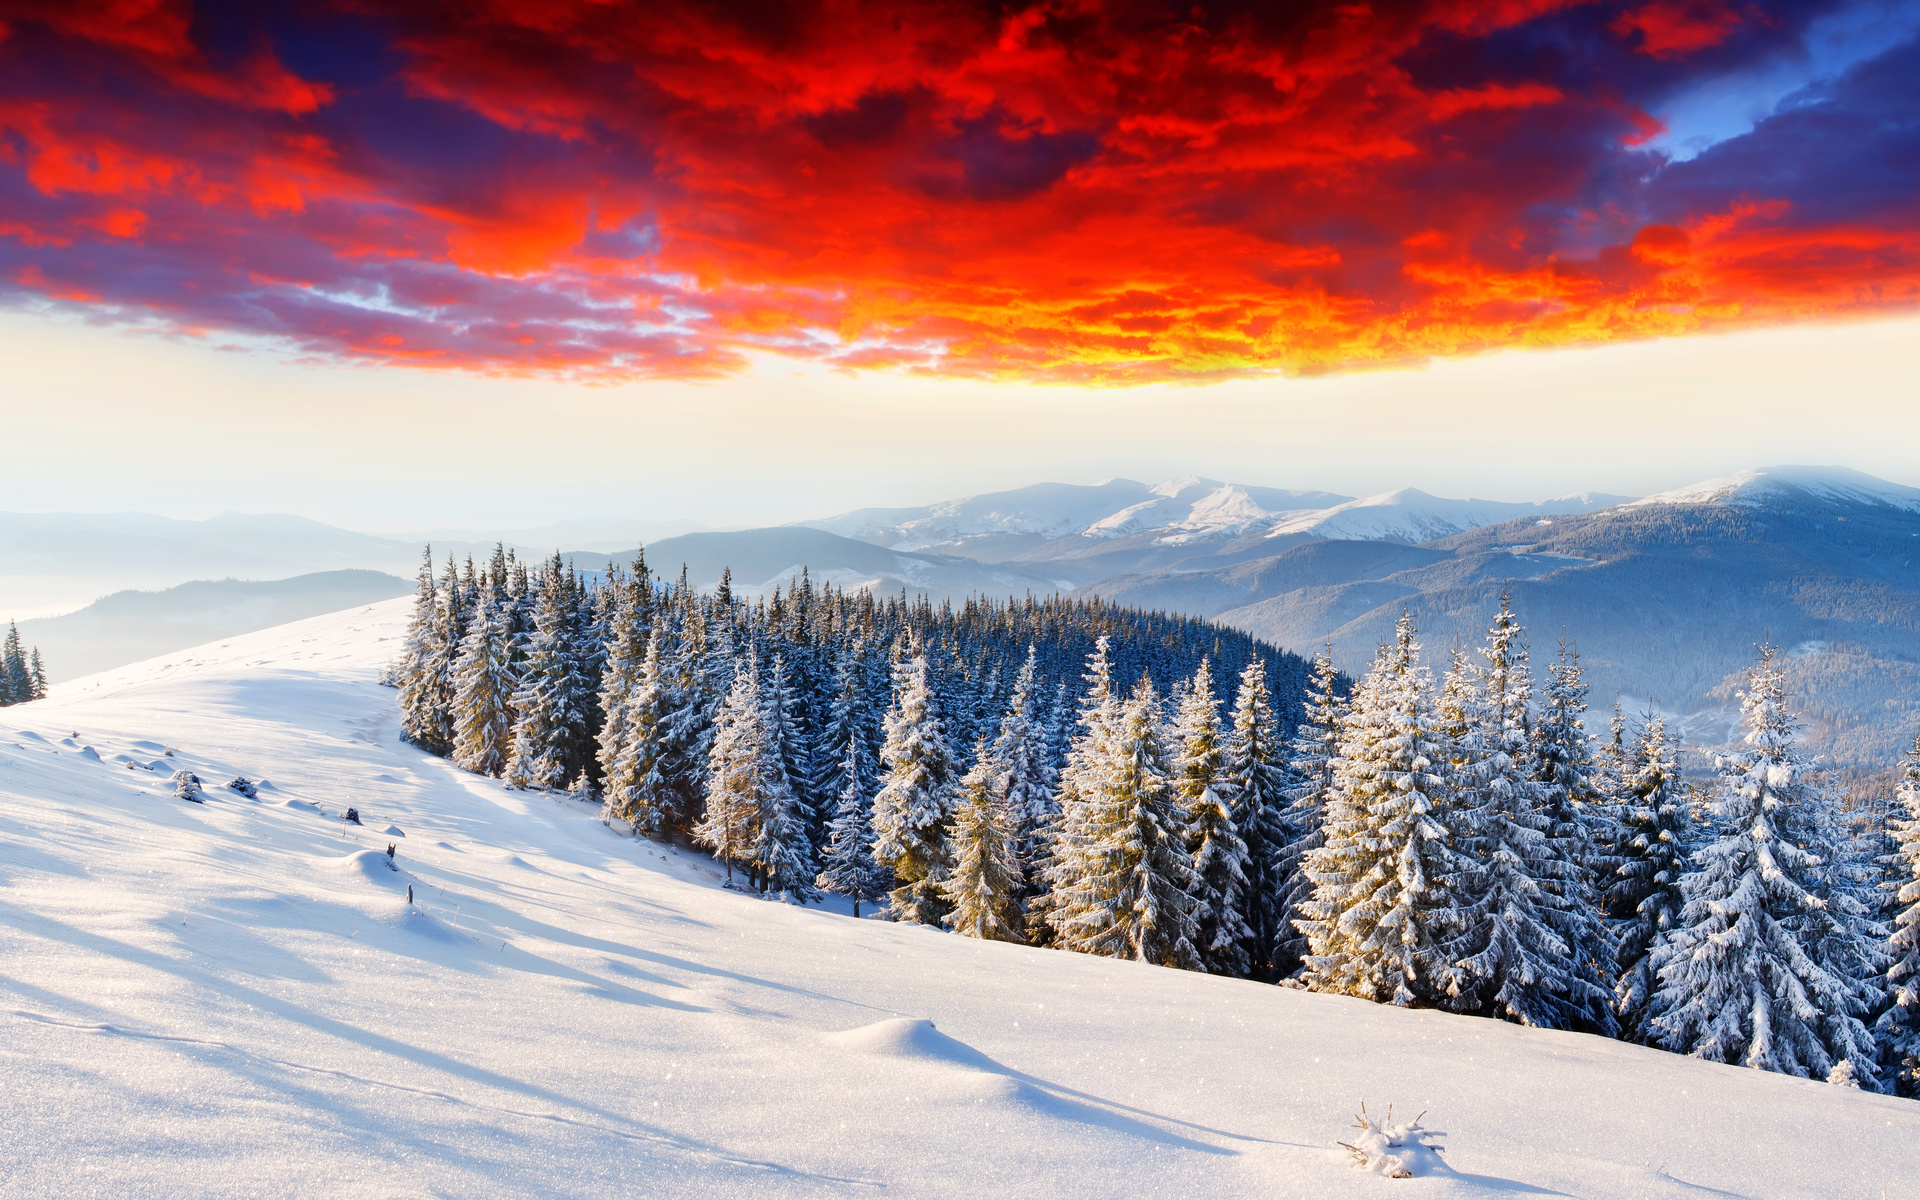 landscapes, Nature, Winter, Seasons, Snow, Trees, Forests, Mountains, Sunsets, Sunrises, Skies, Clouds, Colors Wallpaper